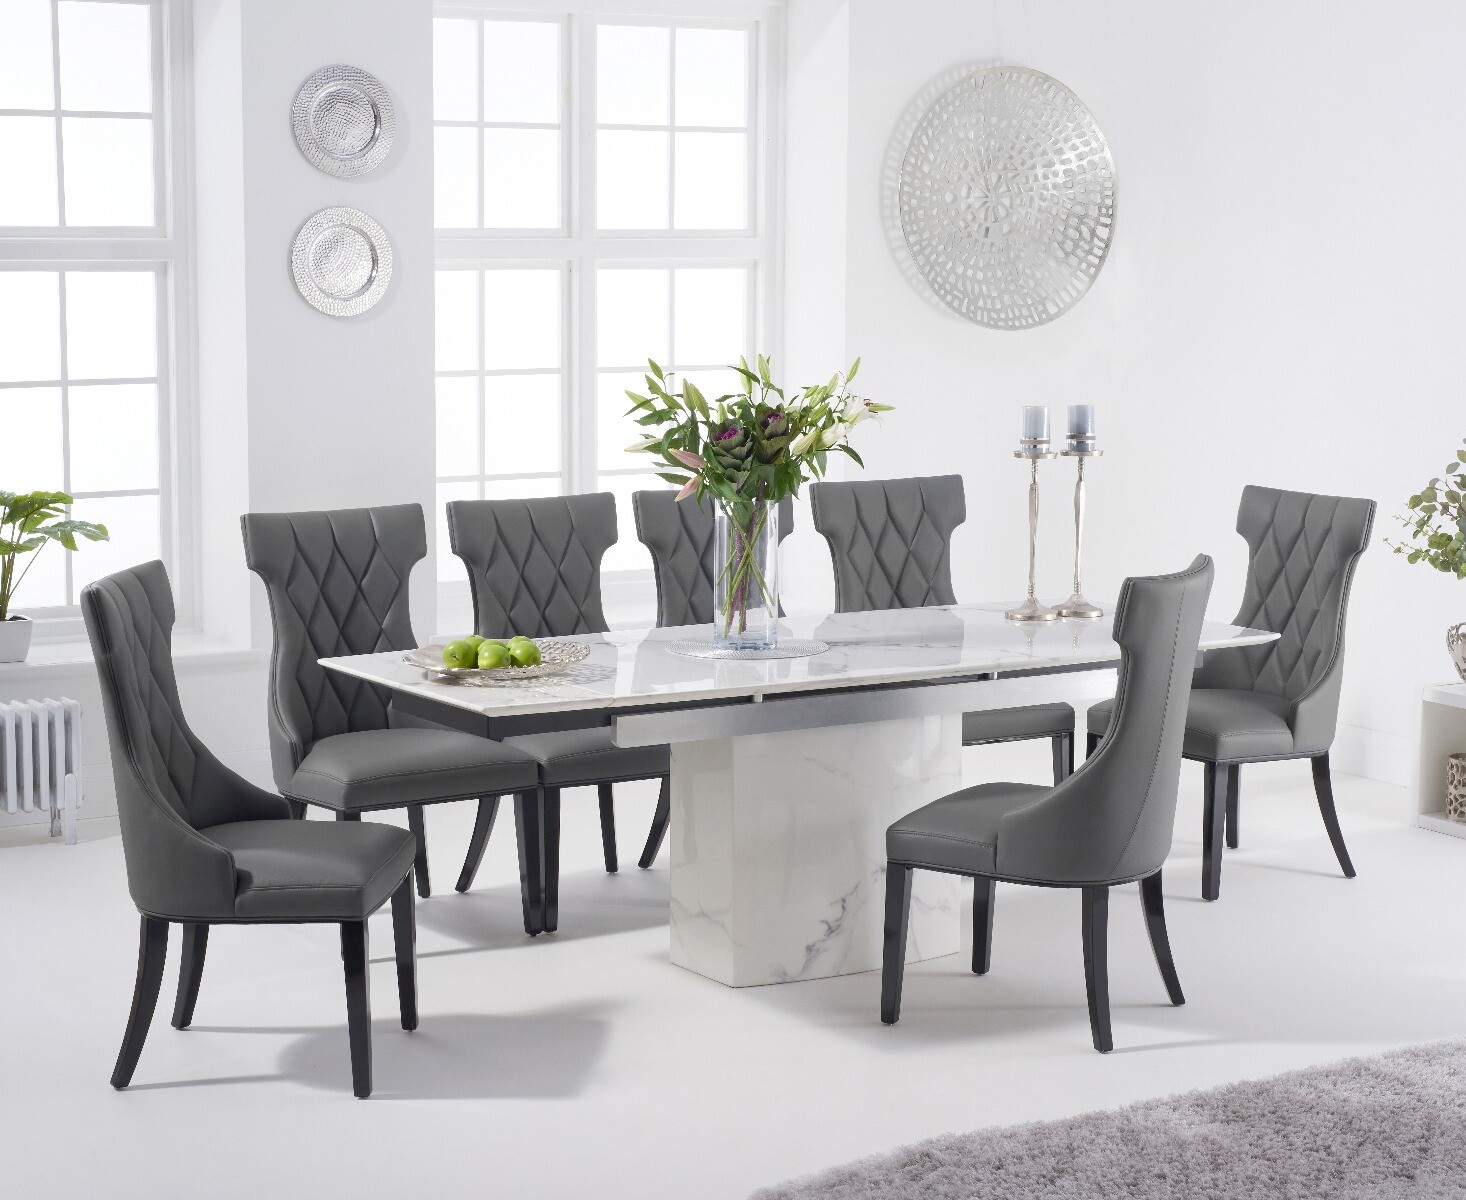 Extending Savona 160cm White Marble Dining Table With 4 Grey Sophia Chairs